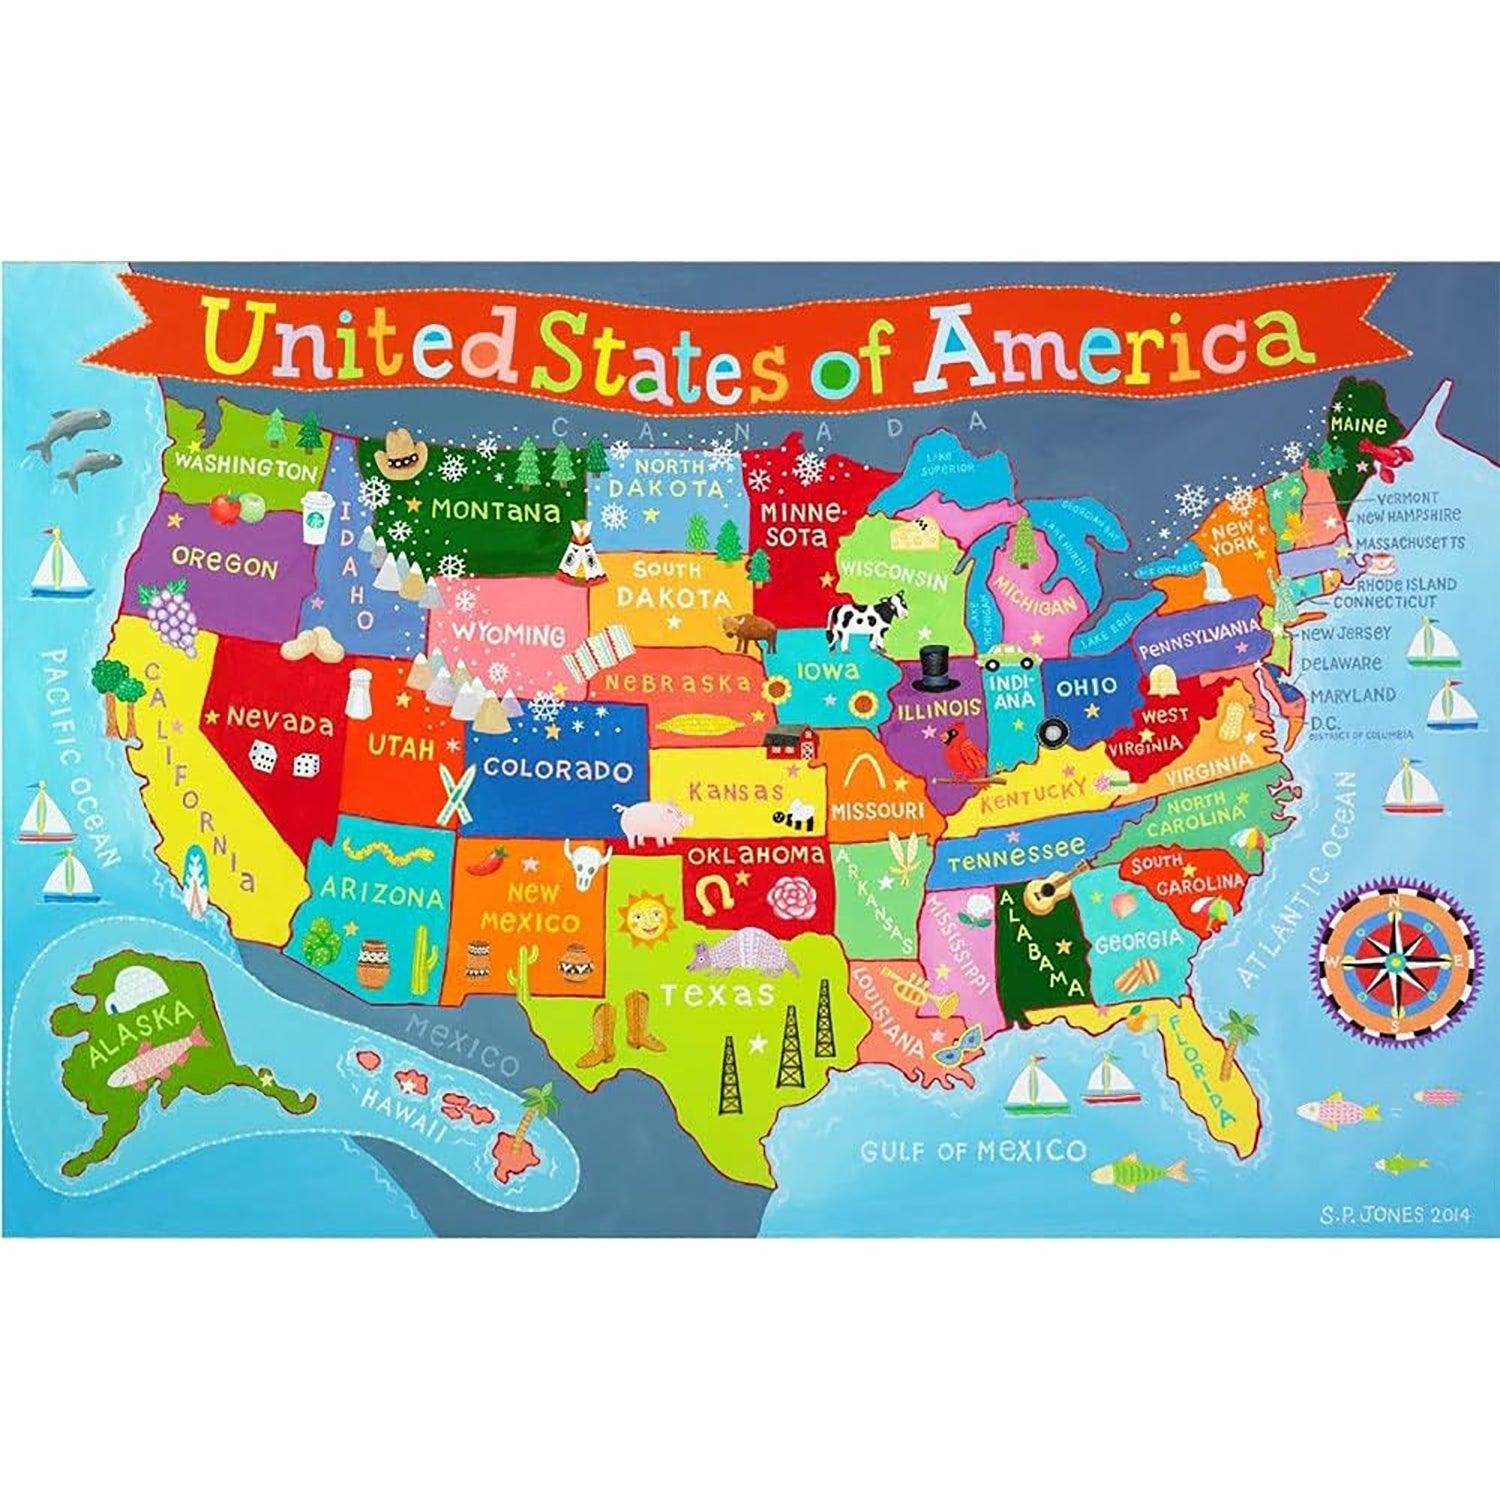 United States Floor Puzzle for Kids, 48 Pieces - Loomini